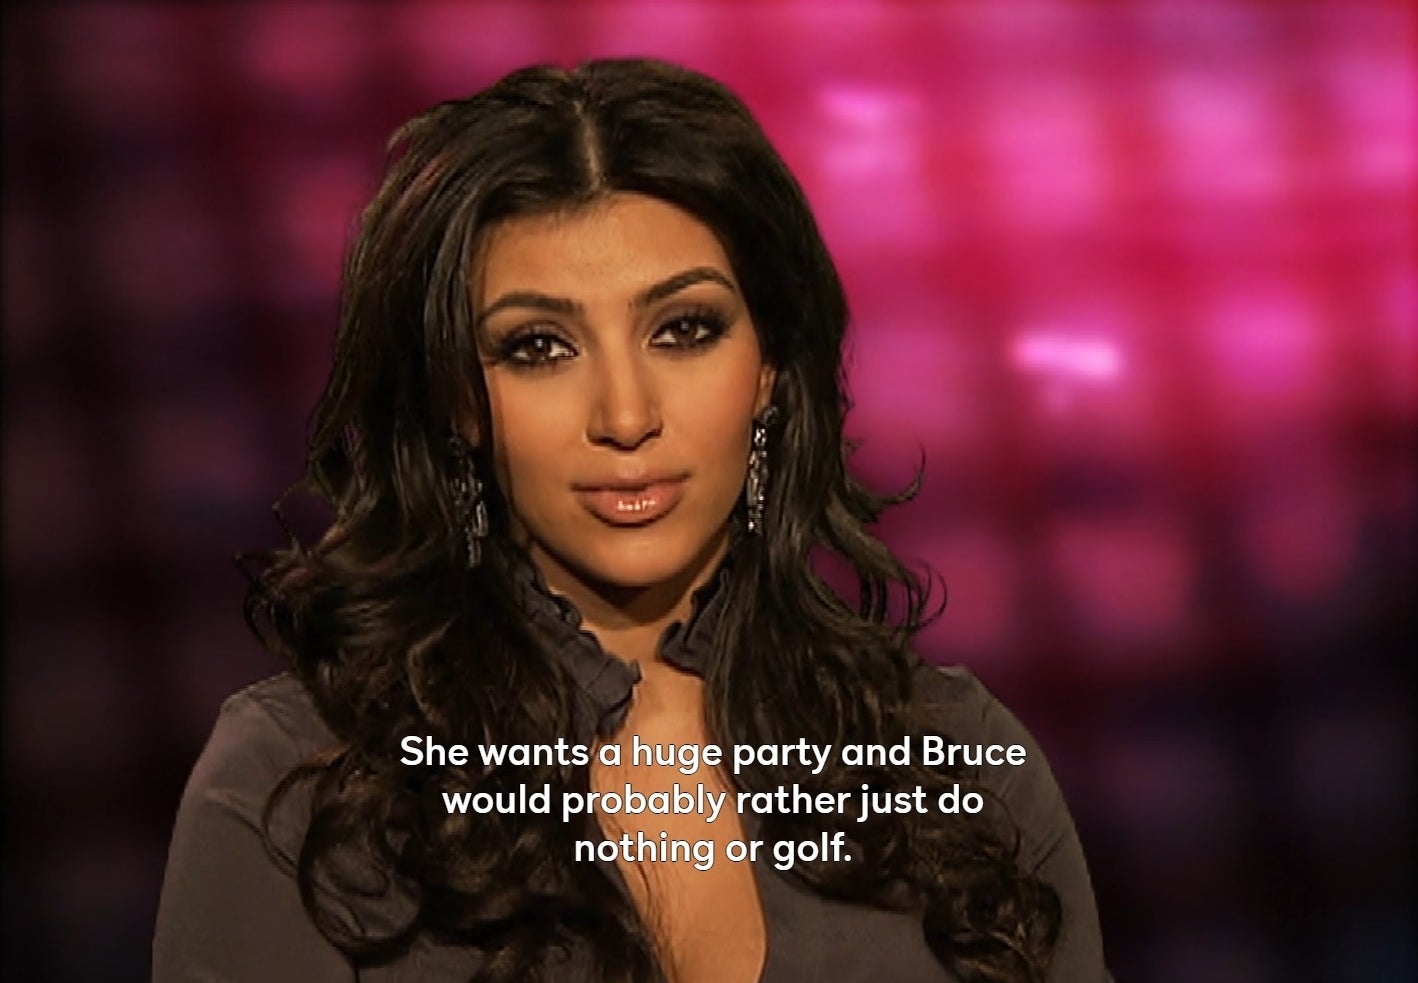 Kim Kardashian explaining Kris wanted a party and Caitlyn would have rather been golfing